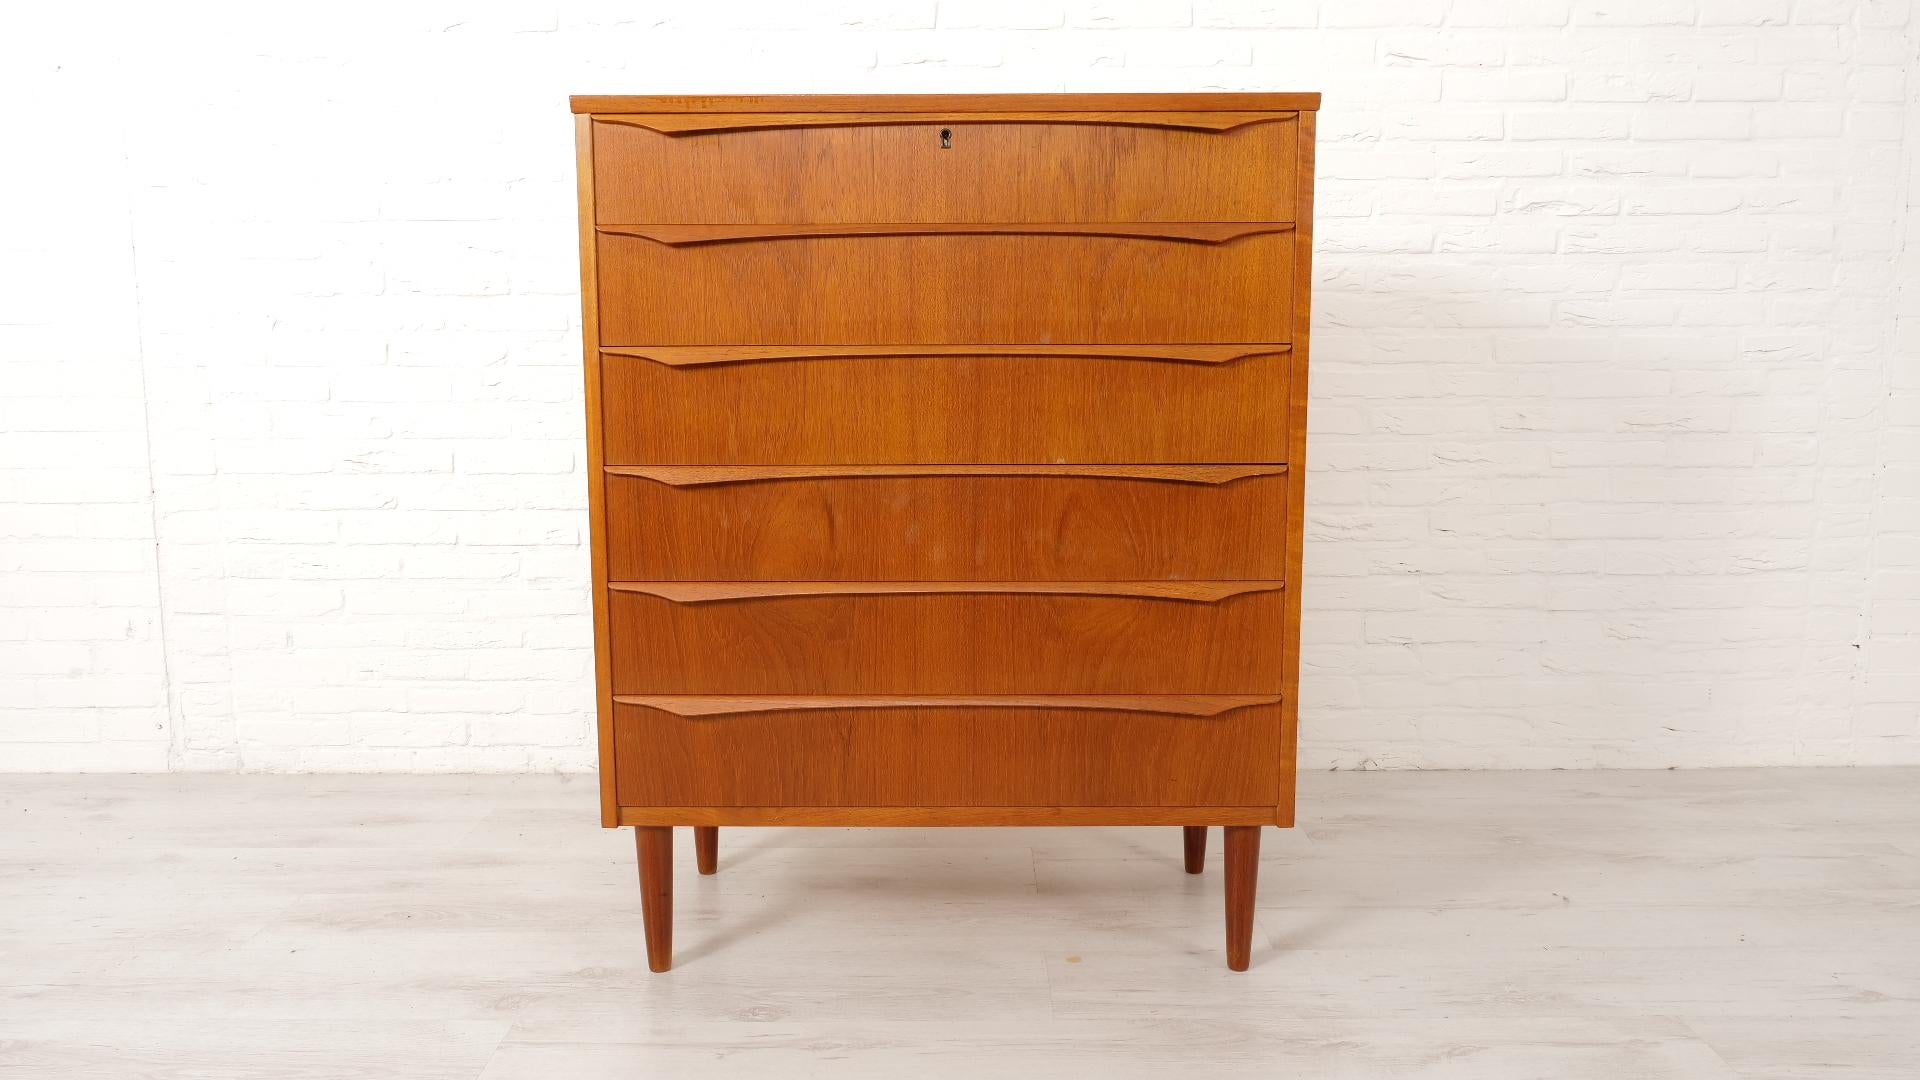 Beautiful vintage chest of drawers, from Denmark. The chest offers a lot of practical storage space and has a crazy look thanks to the beautiful colour of the teak and the subtle wooden handles on the drawers. The chest of drawers has 6